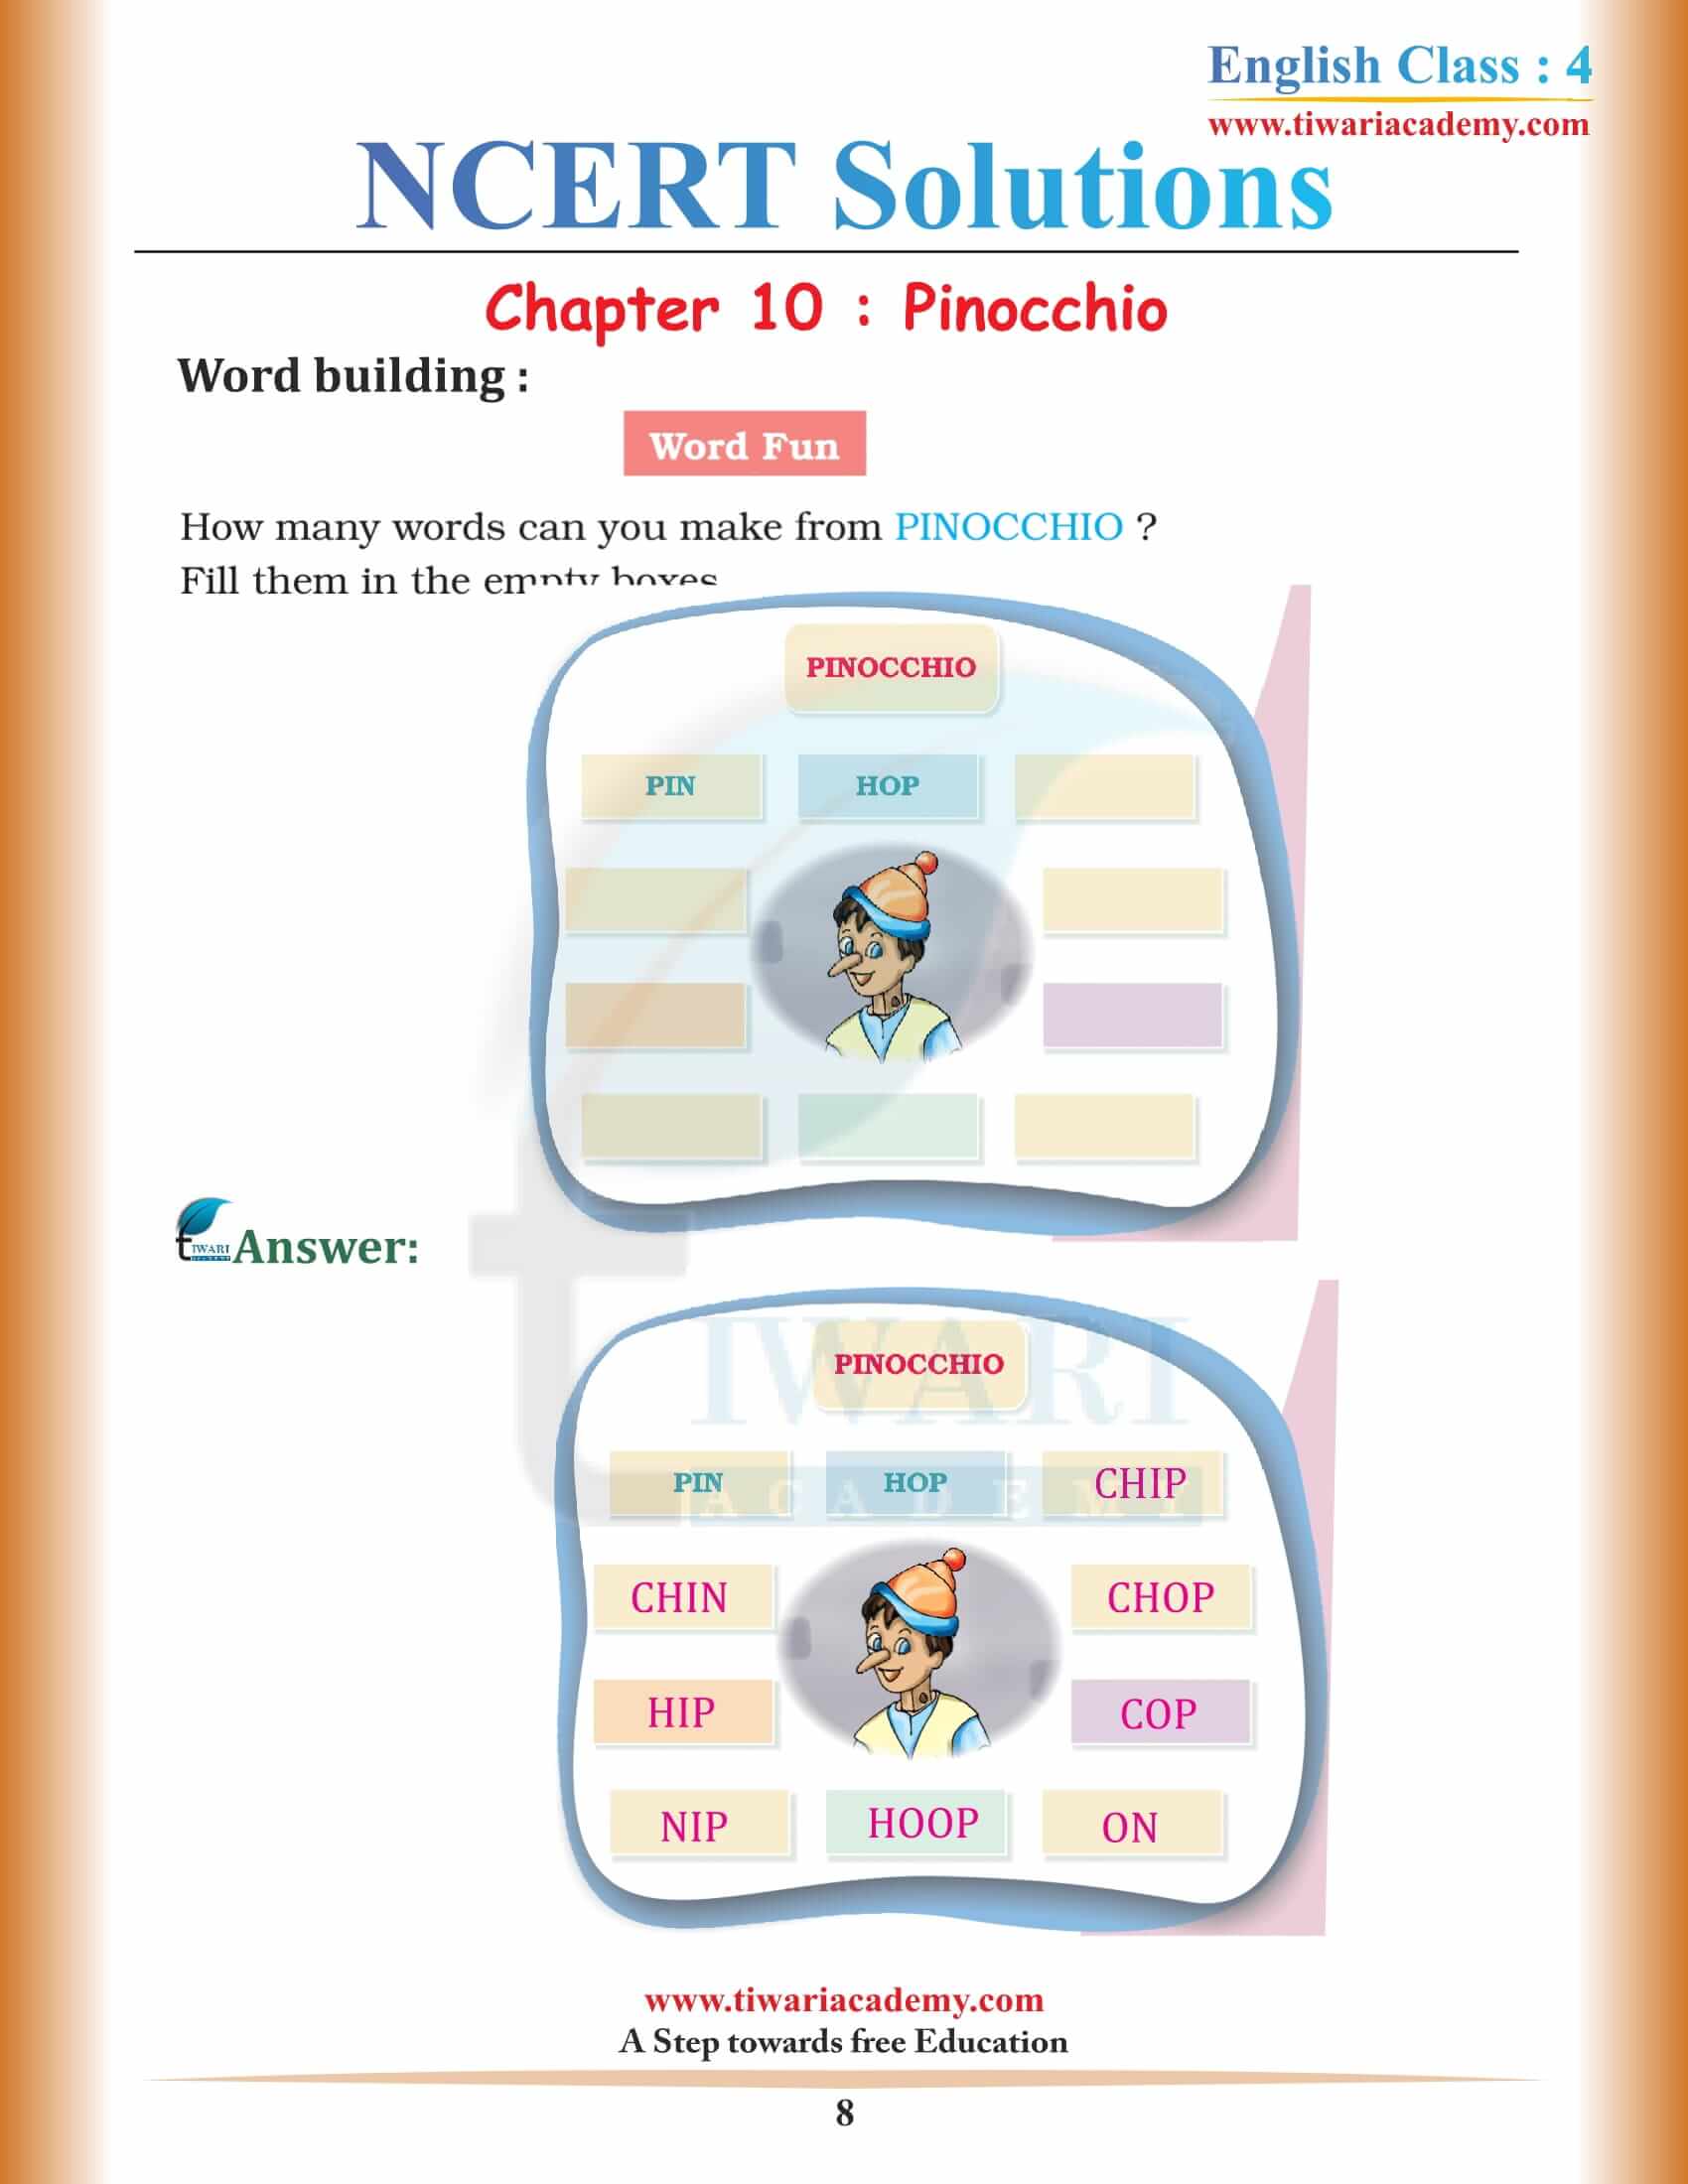 Class 4 NCERT English Book Unit 10 free solutions